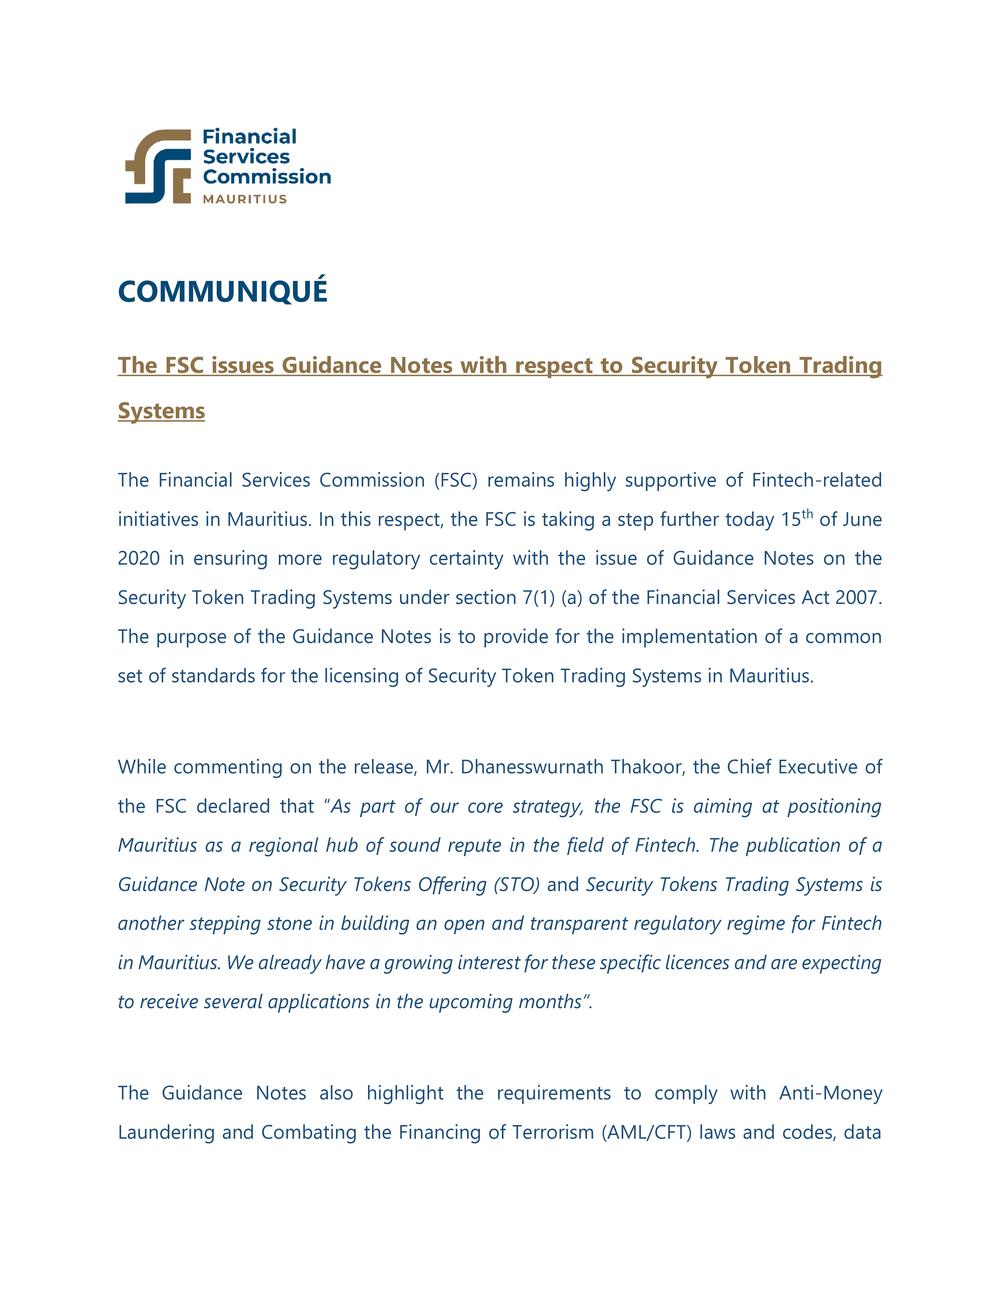 The FSC issues Guidance Notes with respect to Security Token Trading Systems